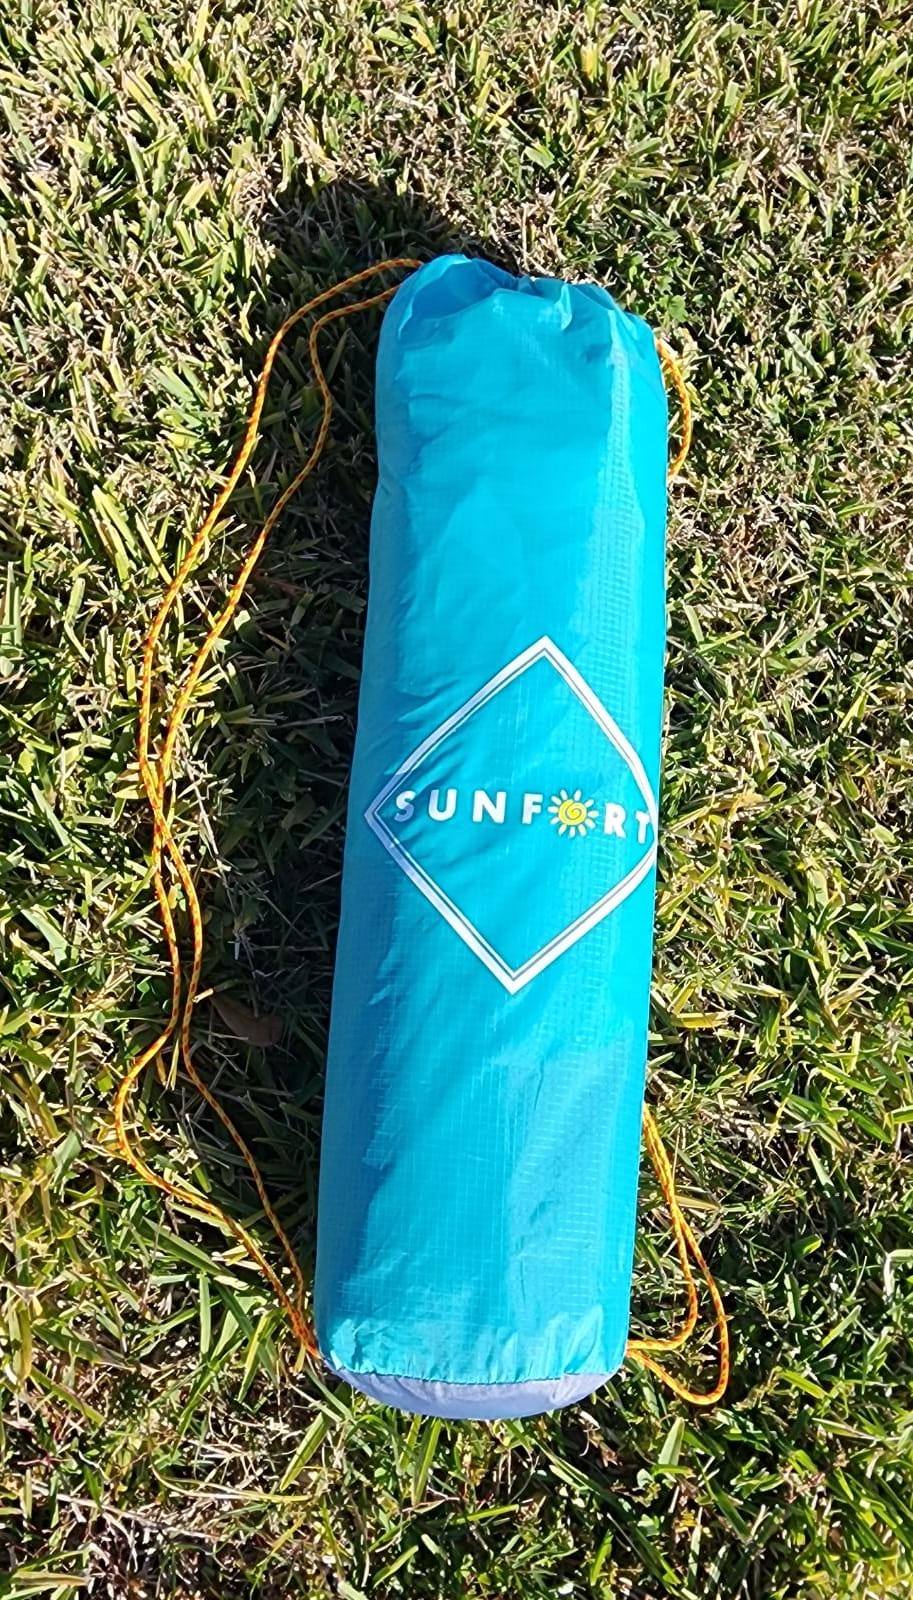 SunFort Portable Walled Blanket (Multi Color Options) - The Sun Fort